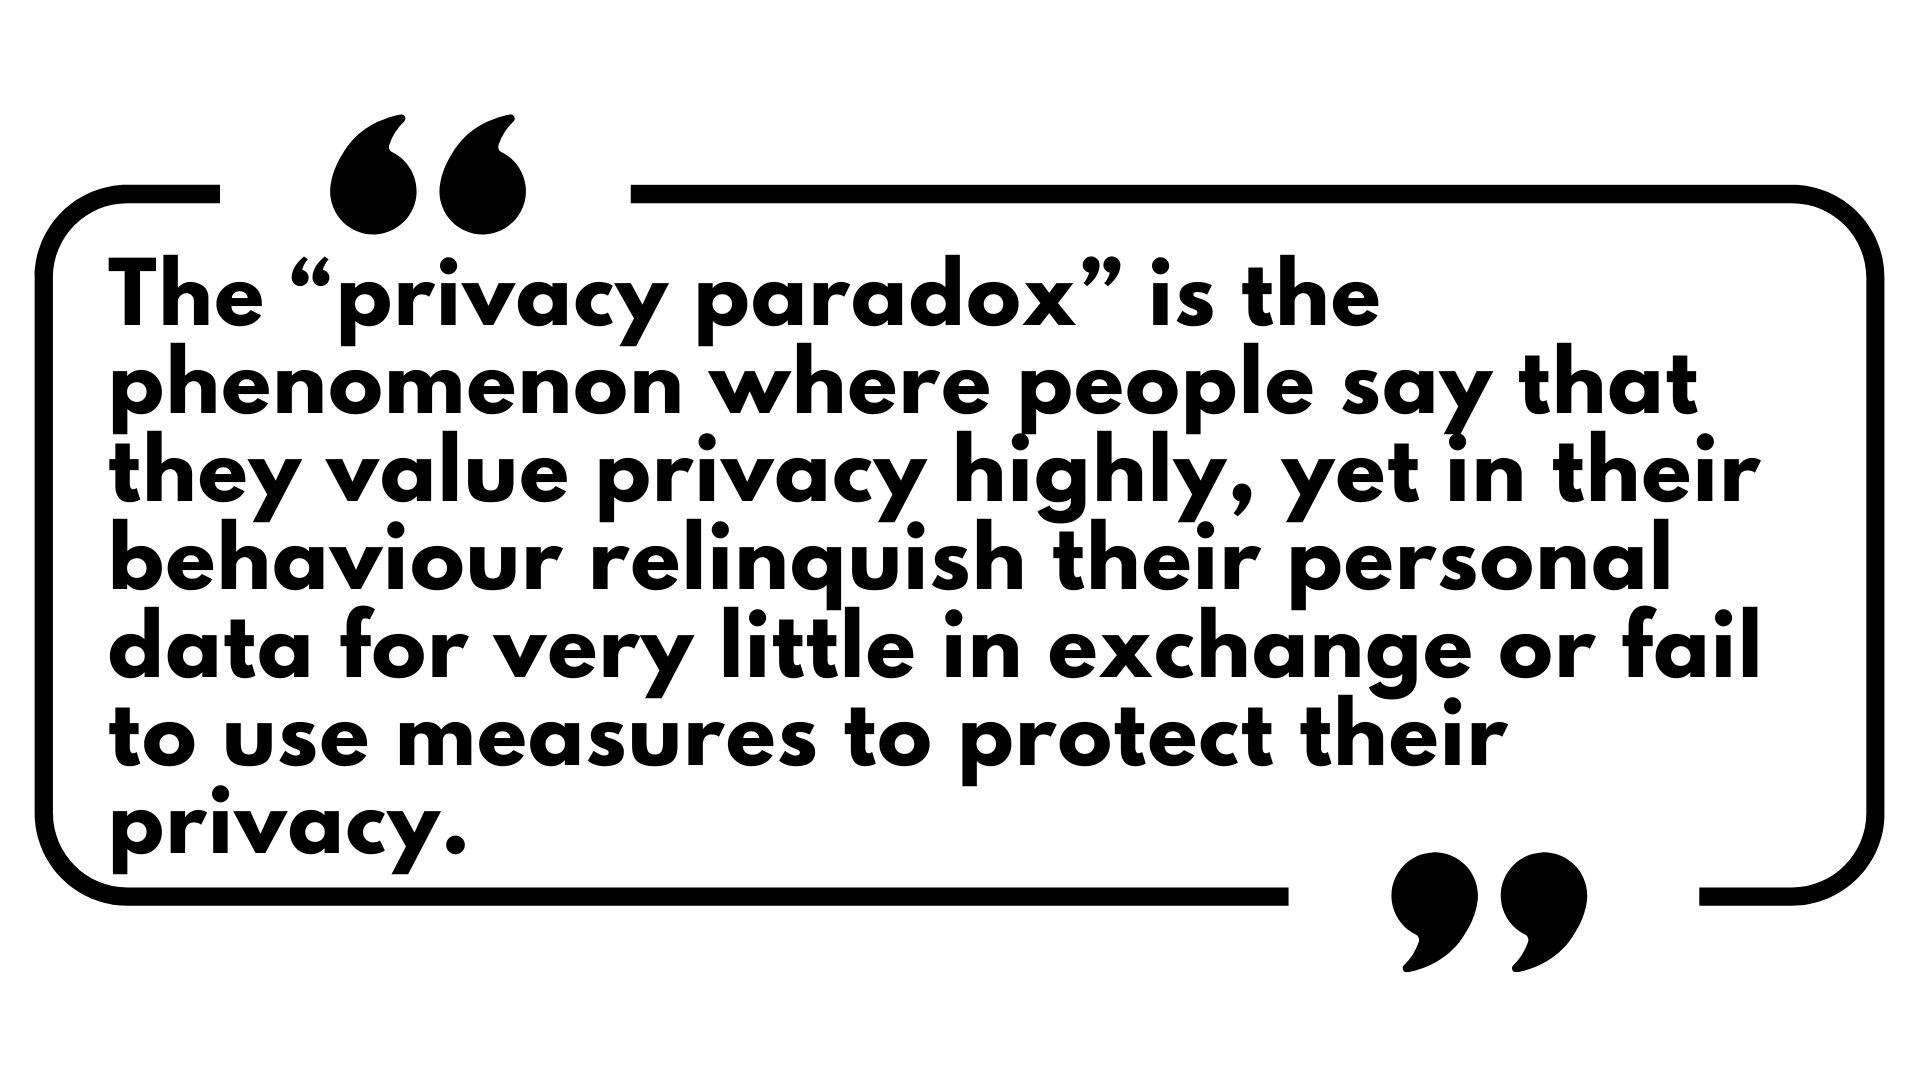 Privacy paradox, personalized experiences, paradox challenges, data-driven, sovereignty, personal information, online data, privacy, privacy fundamentalists, privacy unconcerned, privacy pragmatists, decision making, online, privacy vulnerable, privacy resilient, pragmatic, convenience, awareness, FOMO, fear of missing out, social pressure, personalized content, privacy policies, social media, behaviors, media usage, targeted advertising, phishing scam, privacy self-management, behavioral insights, user-centric regulations, DPDP Act of India, DPDP Act 2023, advertisers, 